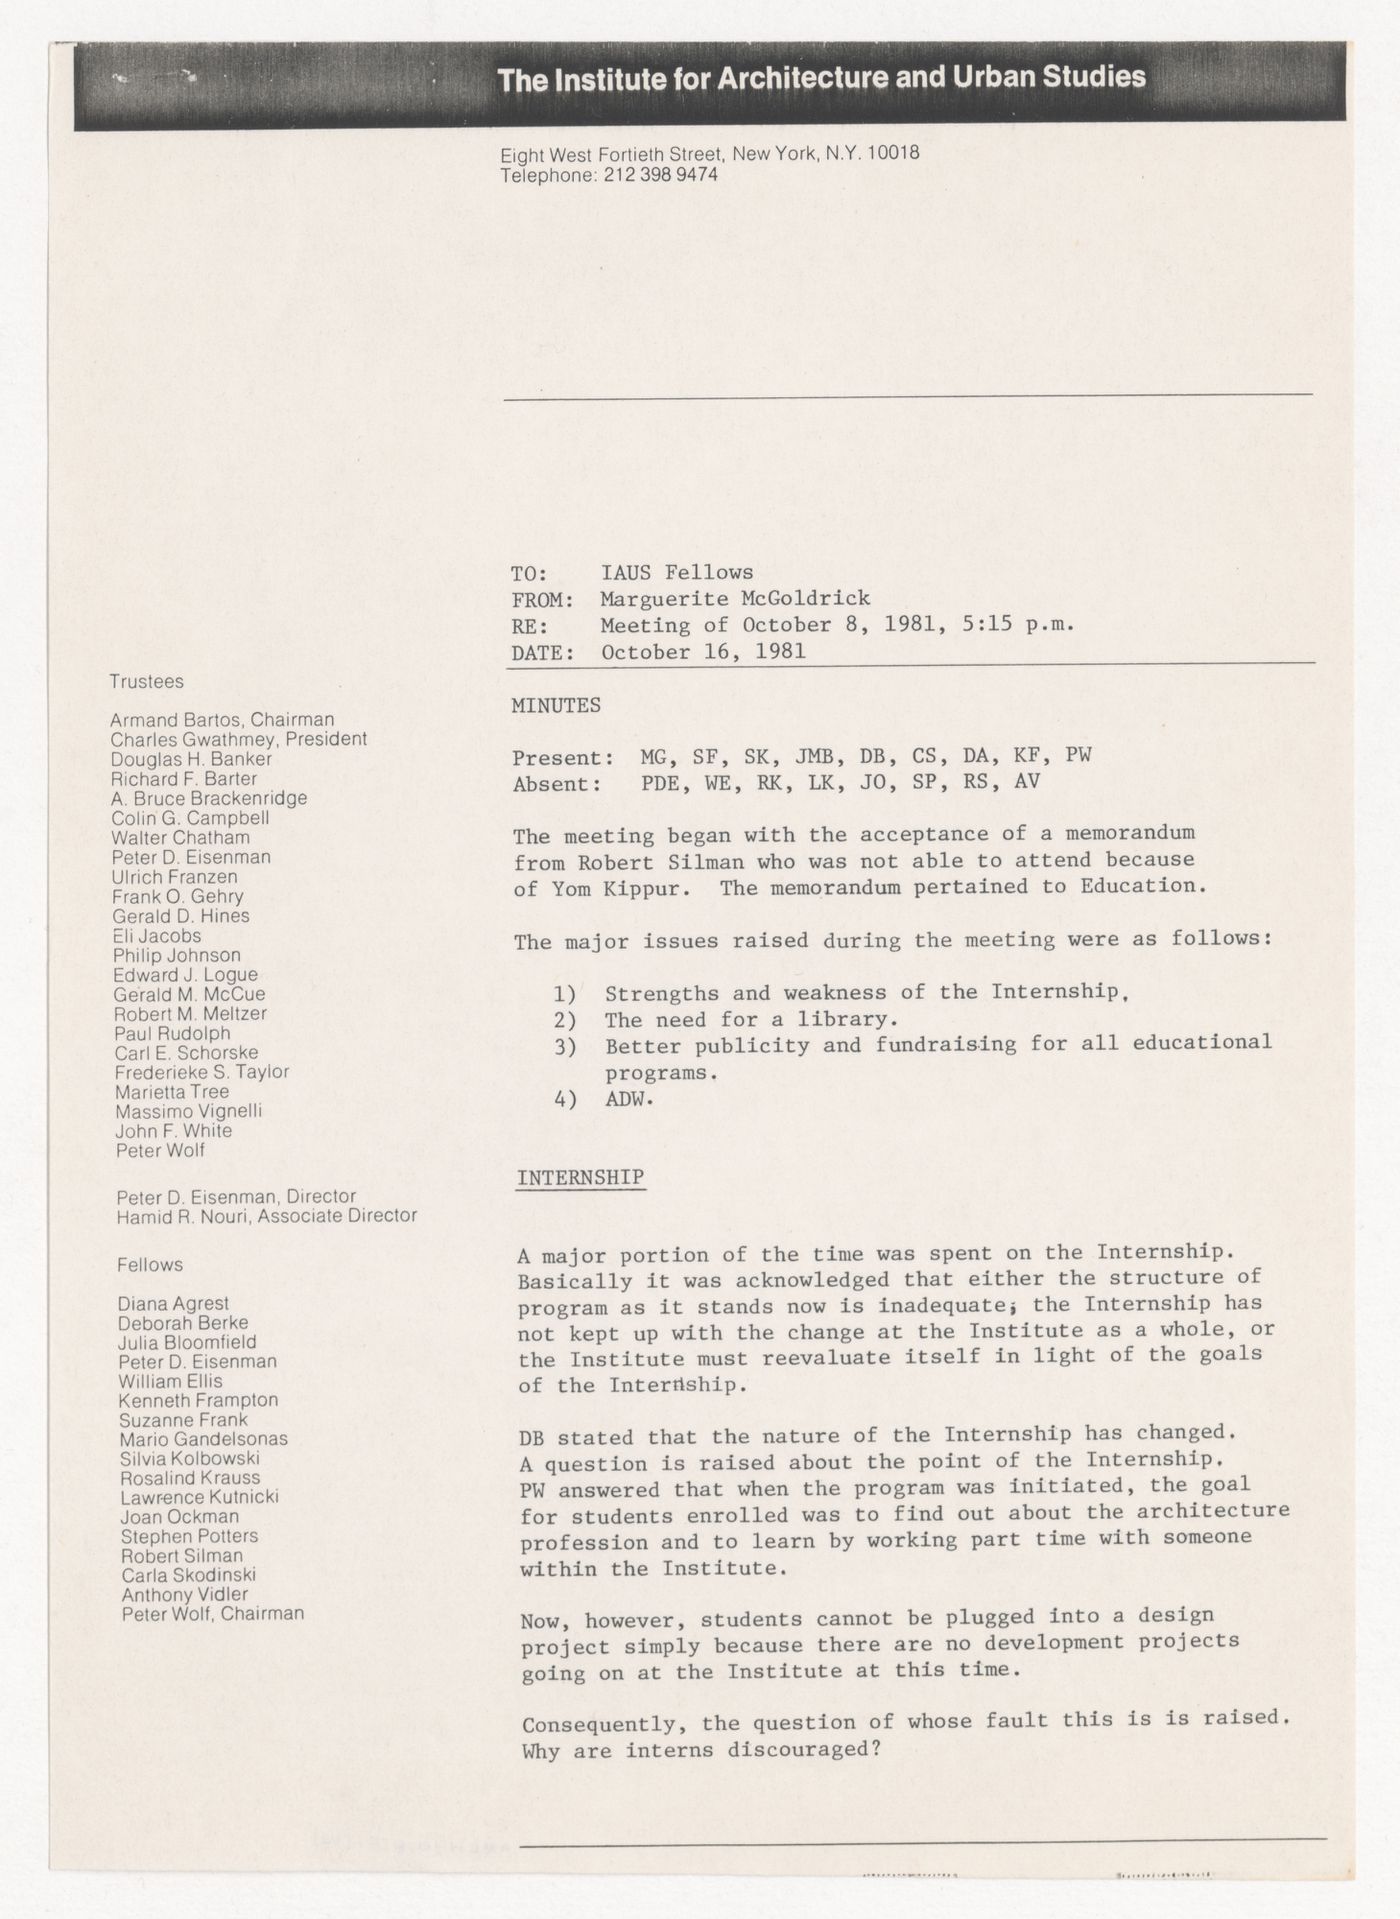 Minutes of meeting of the Fellows of October 8th, 1981